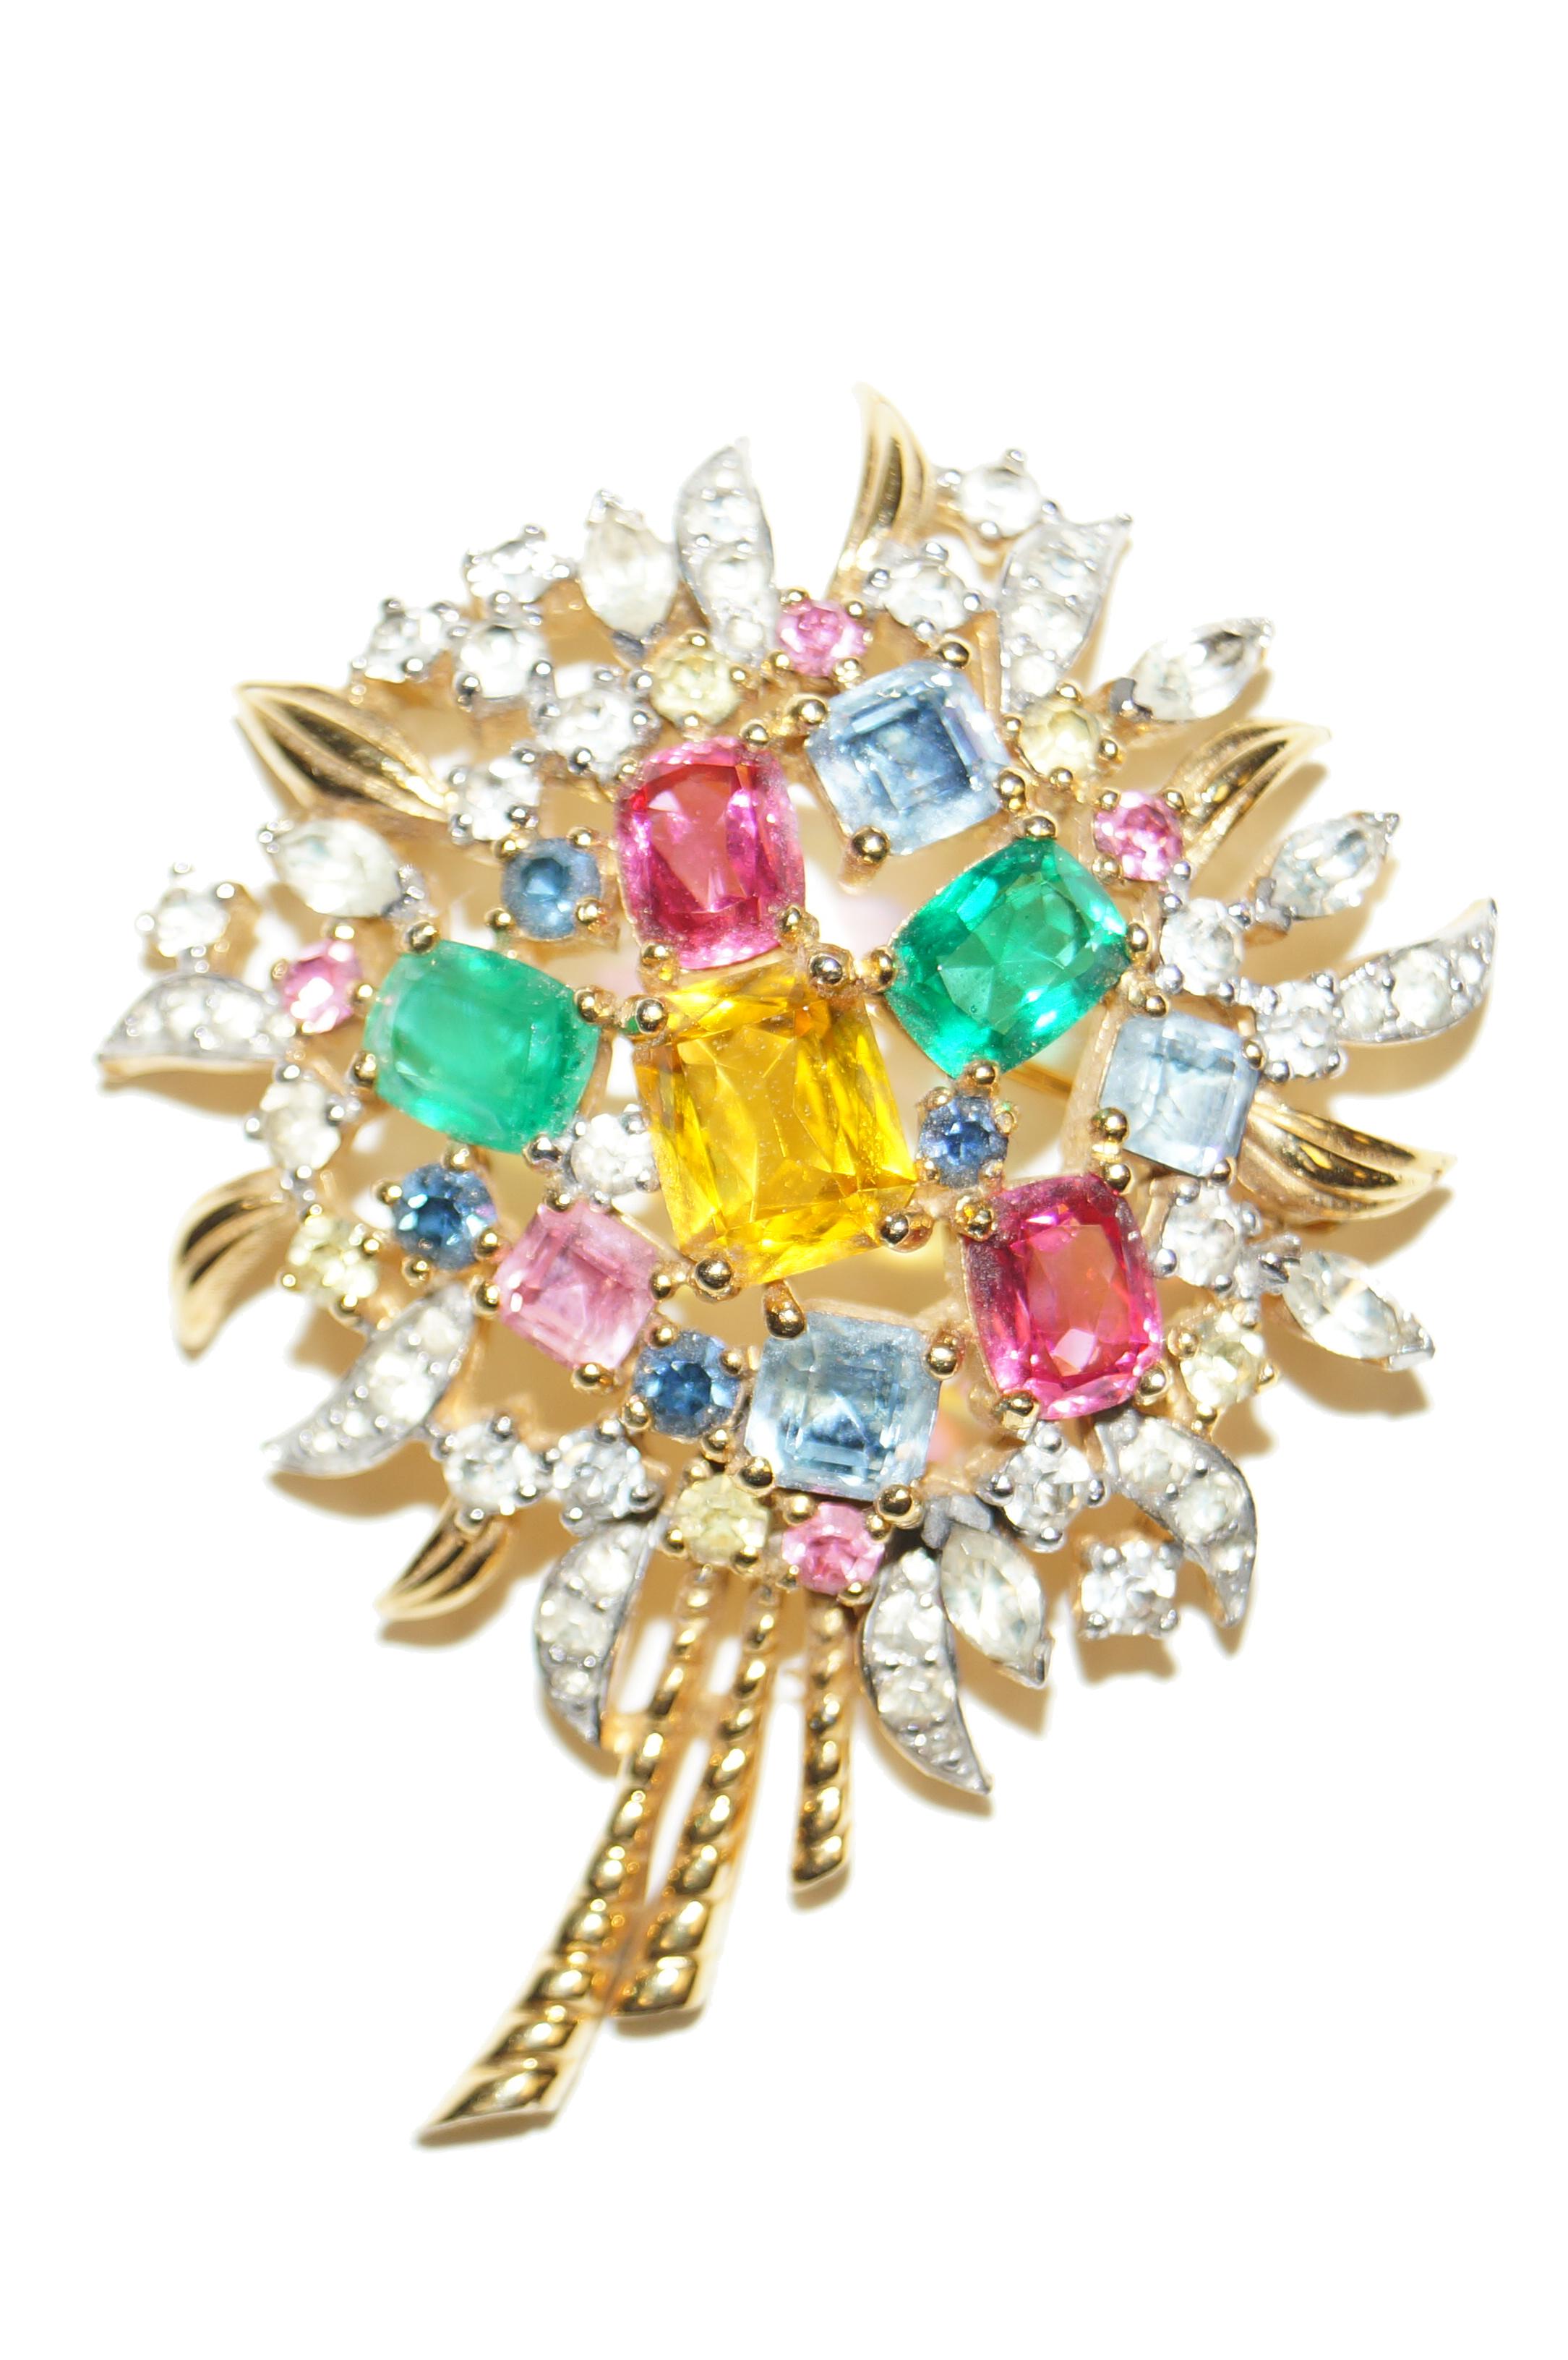 Multi colored crystal rhinestones brighten this gold and silver bouquet by Jomaz from the 1950s. Demi Parure includes coordinating clip on earrings. Perfect Mother of the Bride gift for an upcoming spring or summer wedding. 

Earrings 1.5 x 1.5